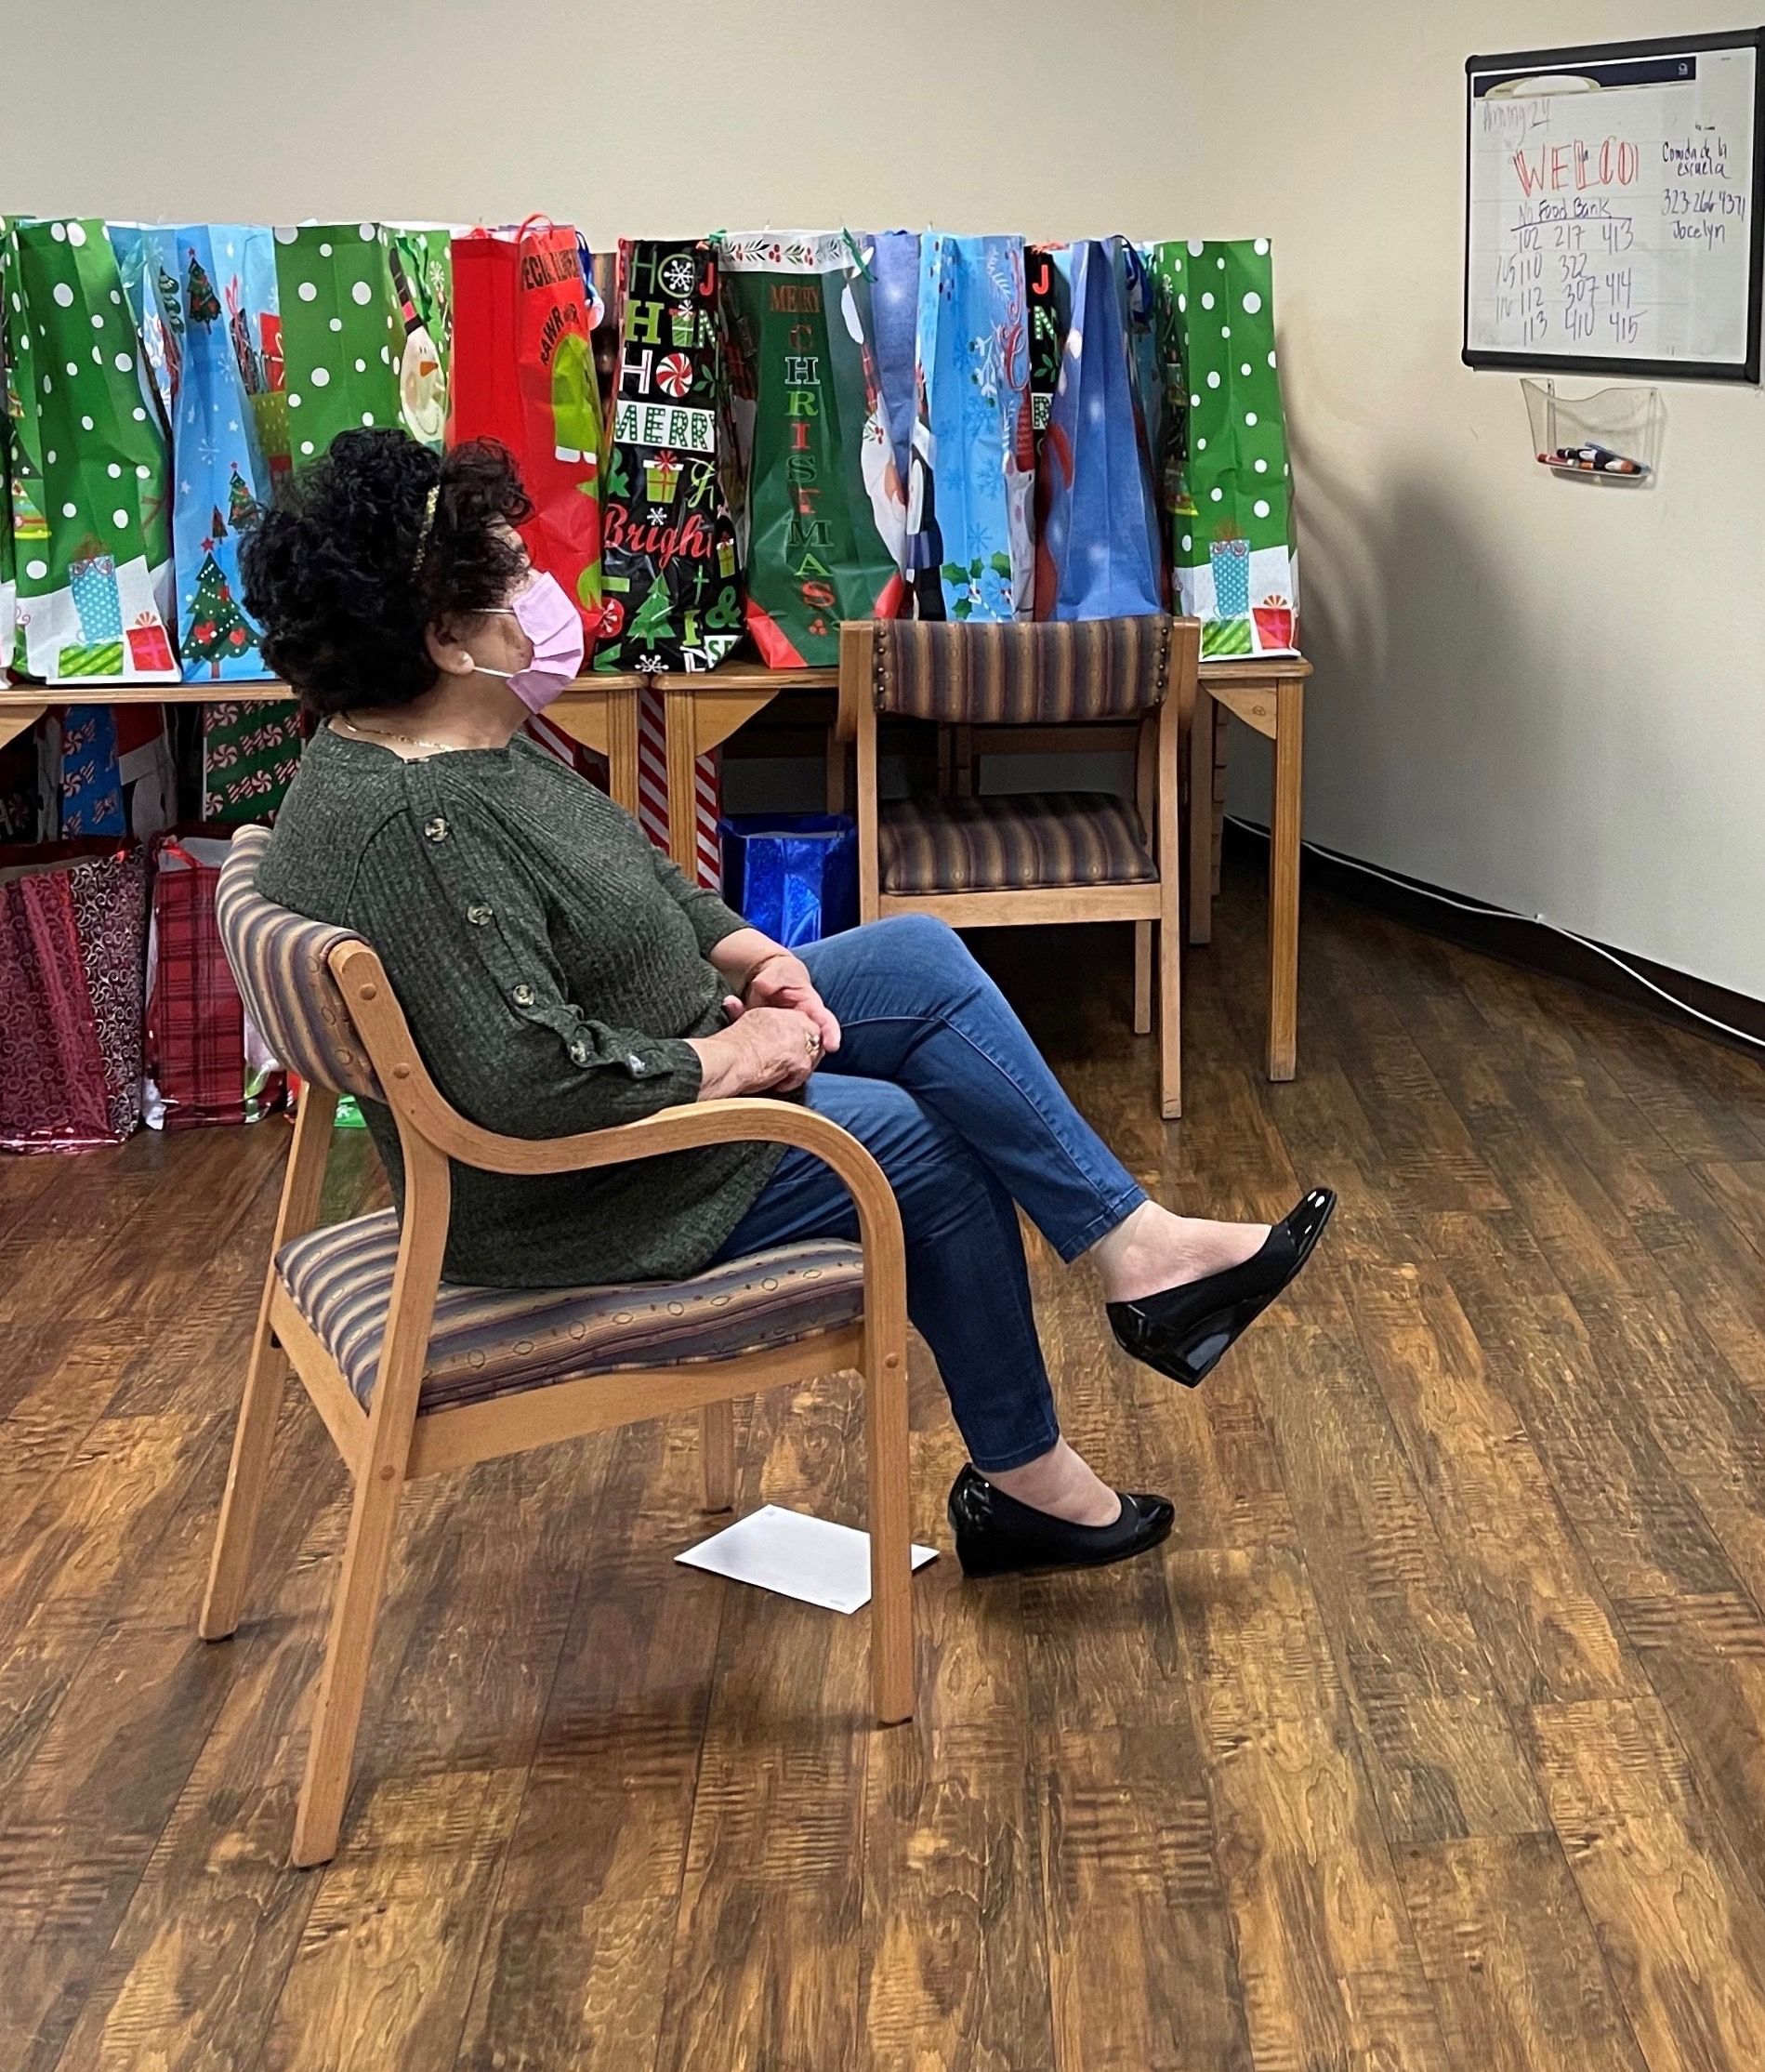 Mirna Cortez participates in a Zoom call in her building's community room, surrounded by holiday donations for seniors at the Retirement Housing Foundation. Image courtesy of Michelle Ornelas. United States, 2020.